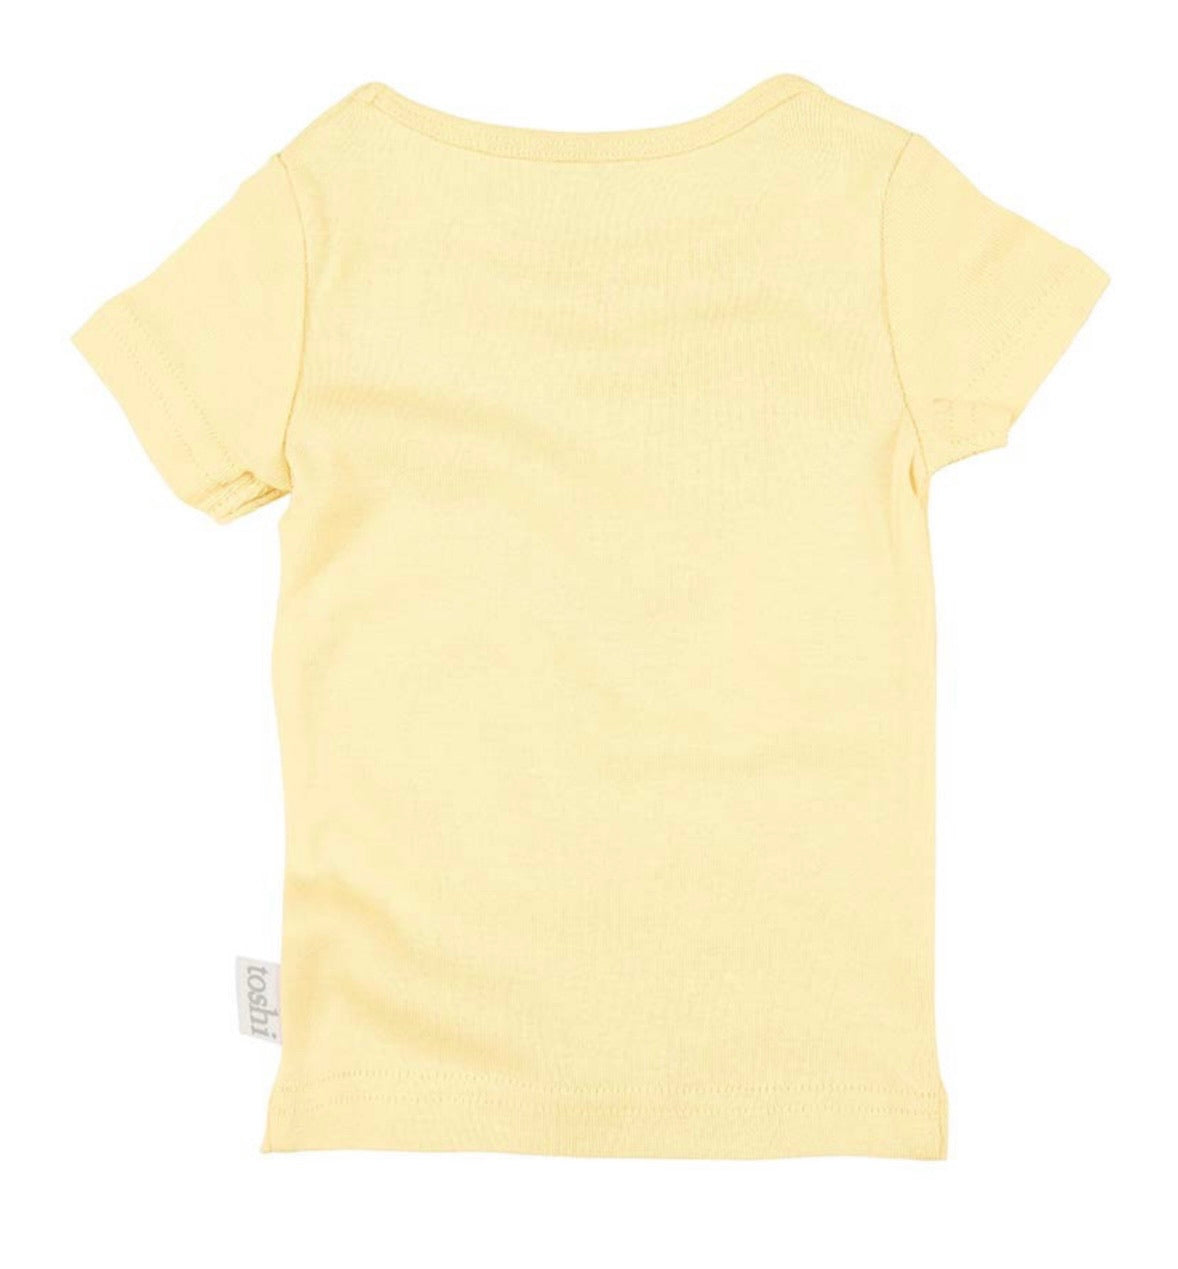 Toshi | Dreamtime Organic Tee Short Sleeve | Buttercup| Size 3-6M